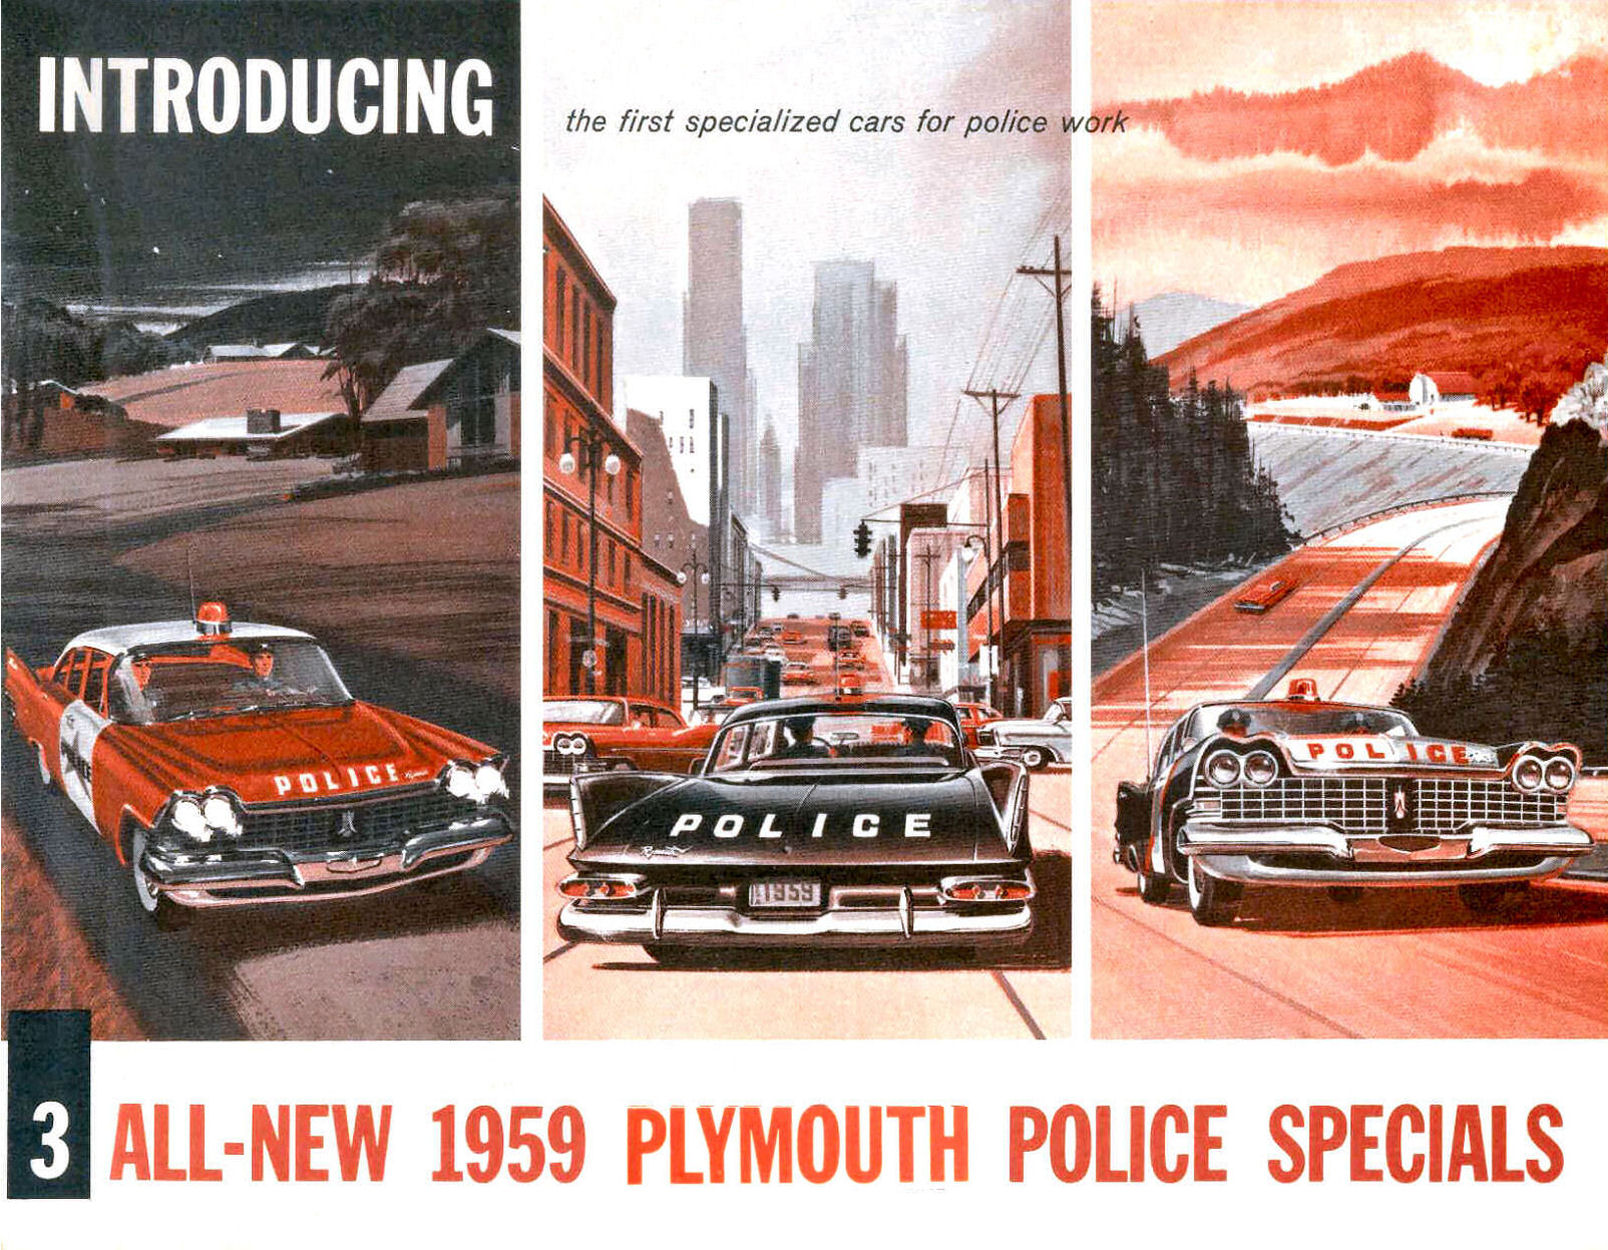 1959 Plymouth Police Specials.pdf-2023-11-22 14.29.7_Page_1